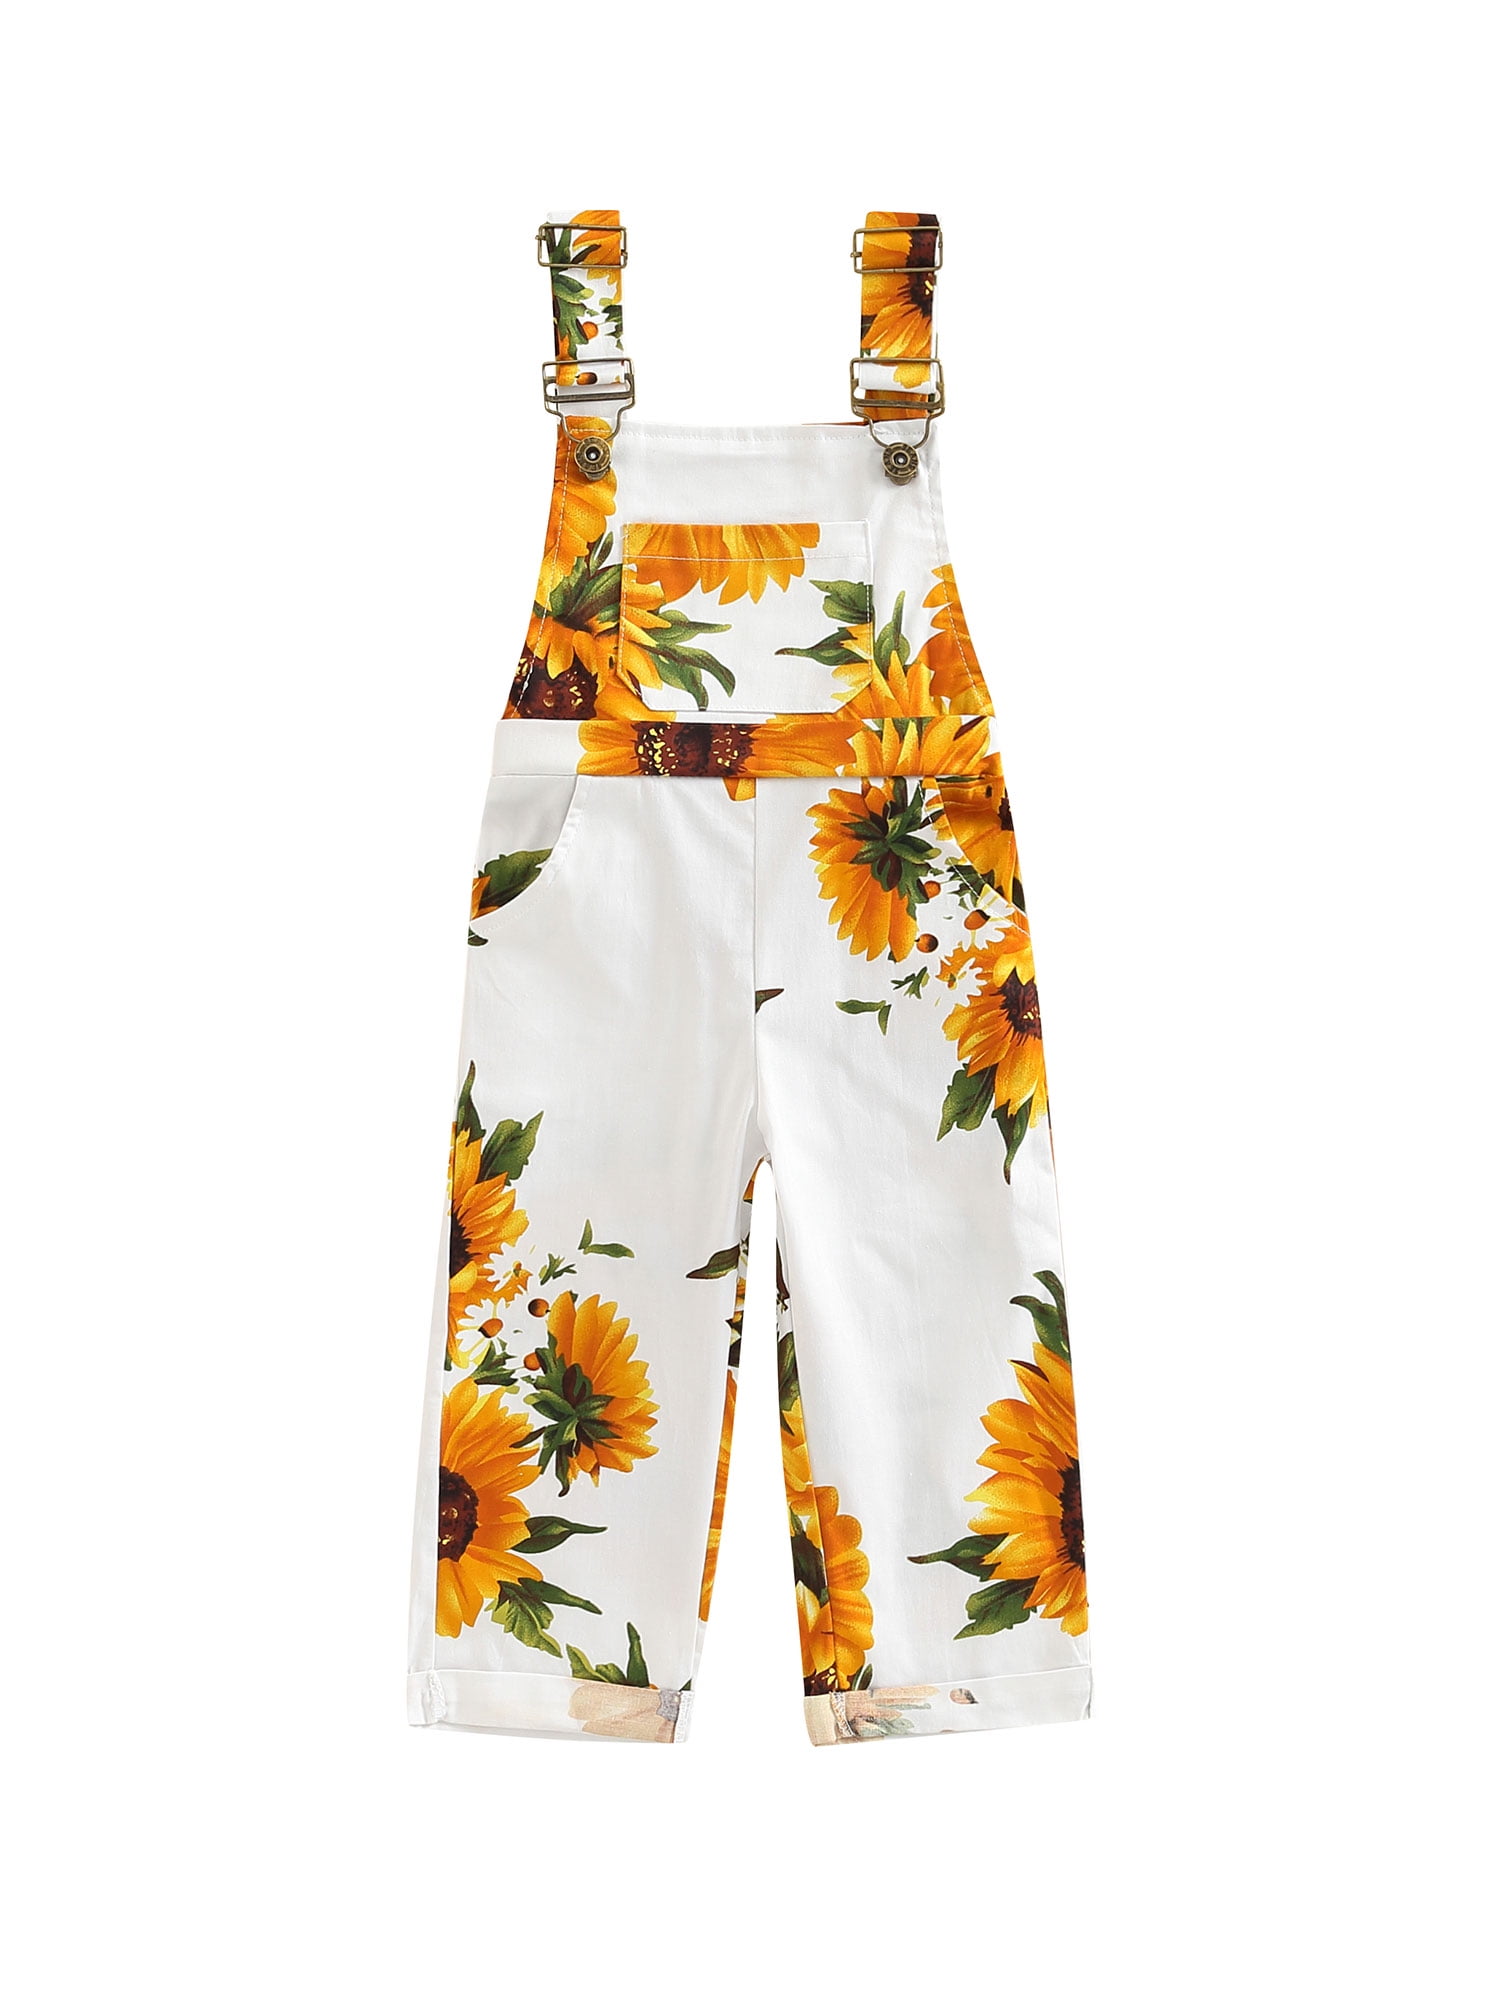 Baby Little Girl Sunflower Printed Big Bibs Overalls Shorts Suspender Shortall Toddler Summer Clothes Outfits with Pockets 